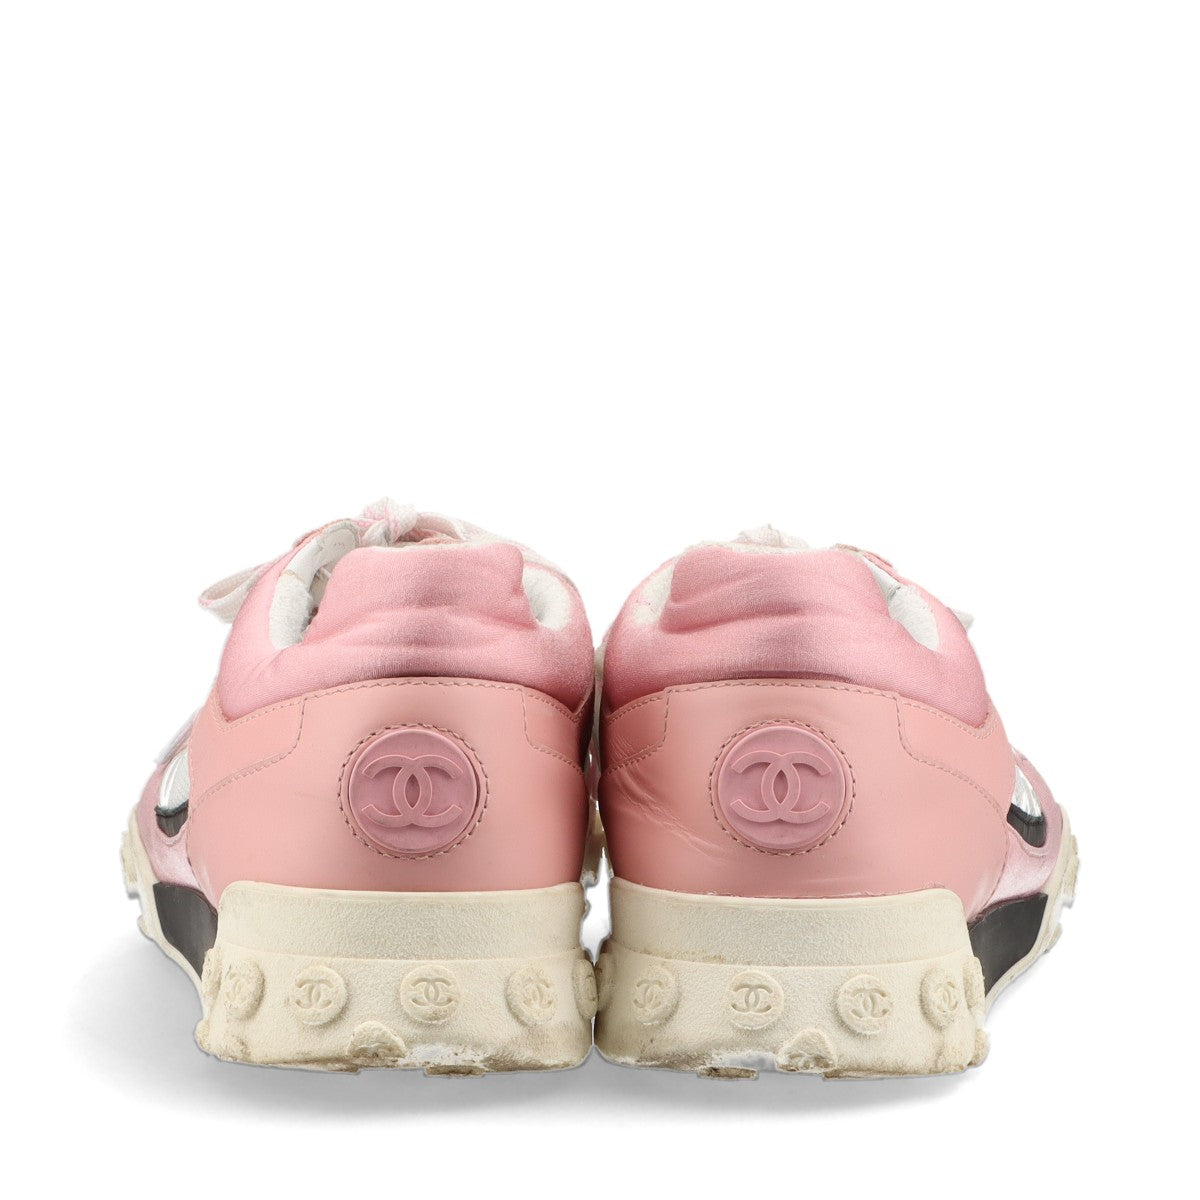 Chanel Coco Mark Leather x fabric Sneakers EU40 Ladies' White x pink G34086 Mesh